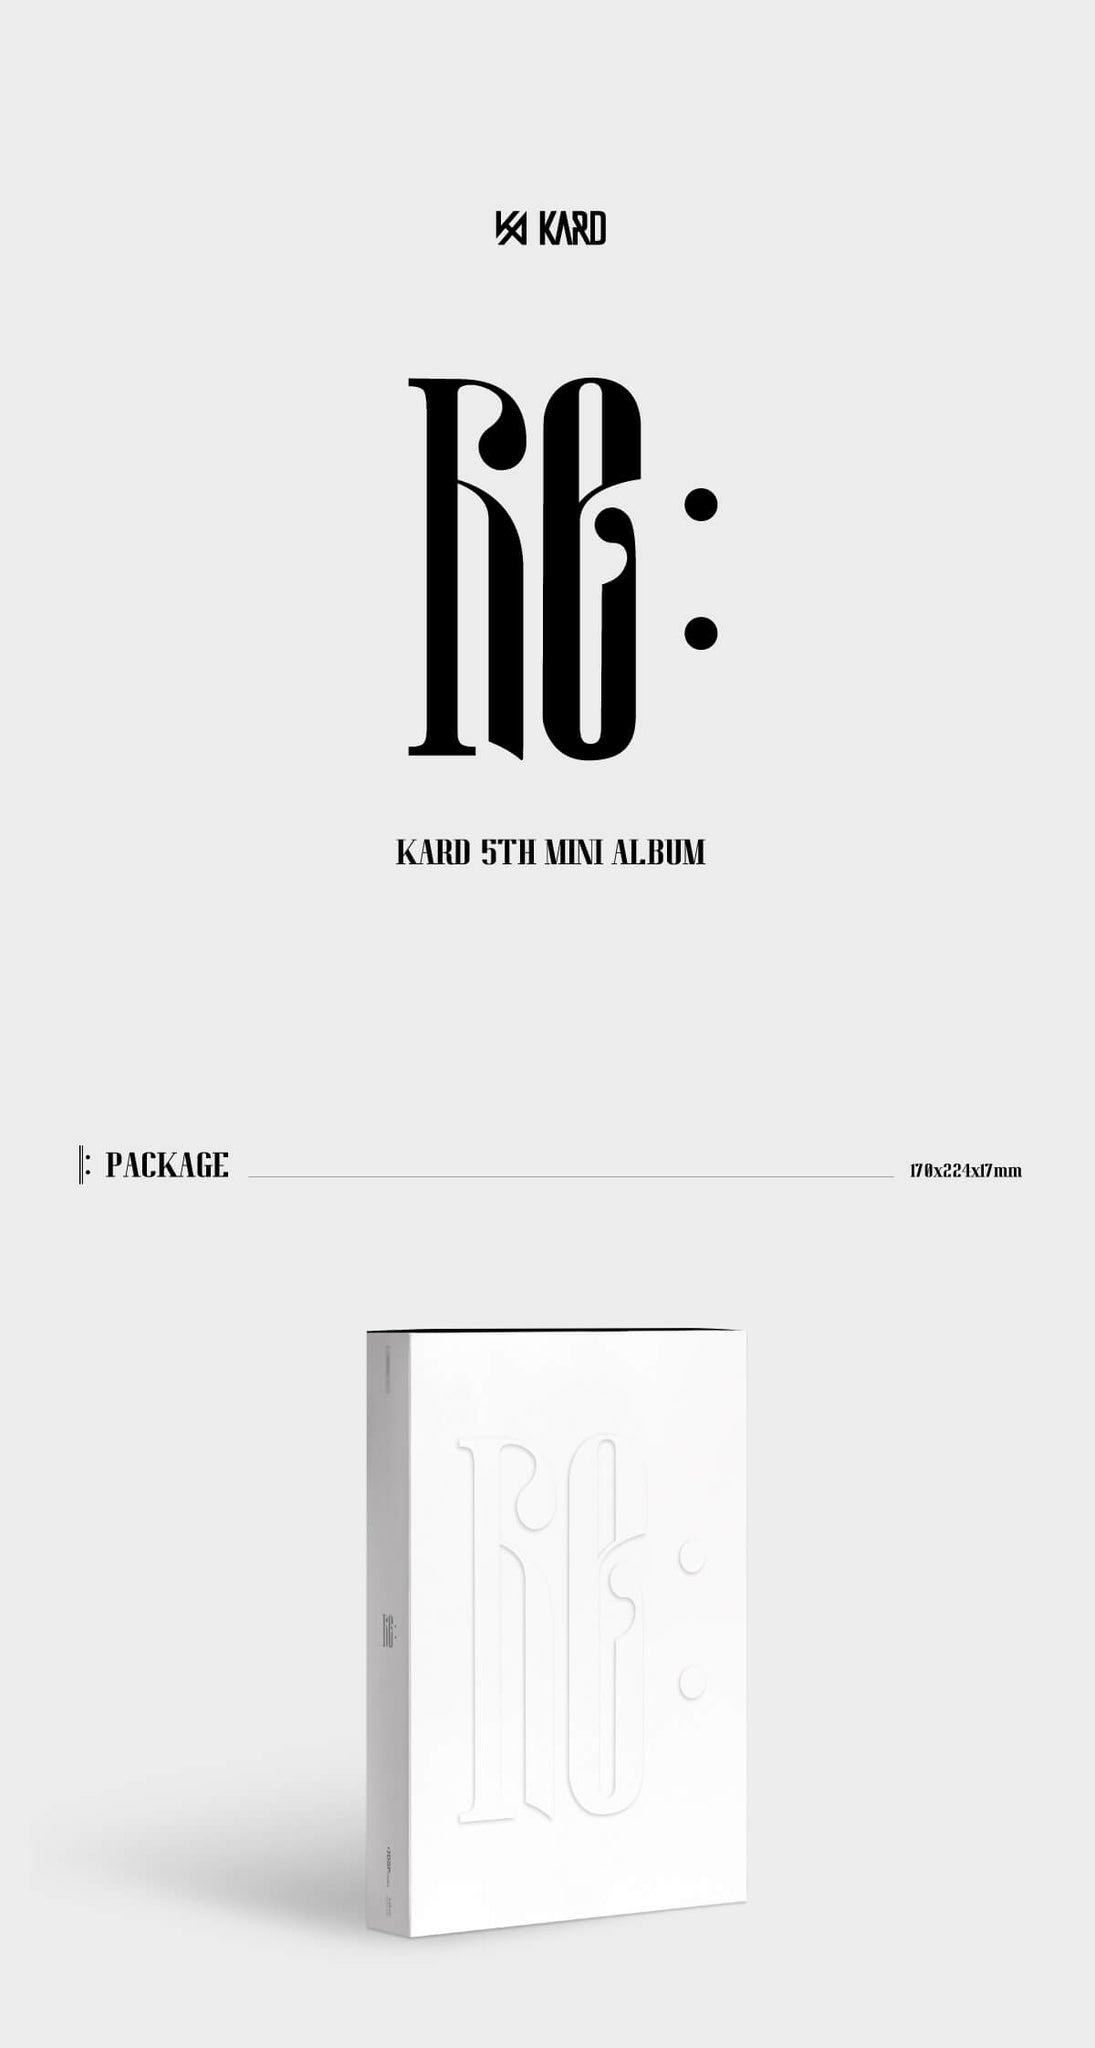 KARD 5th Mini Album Re: Inclusions Package